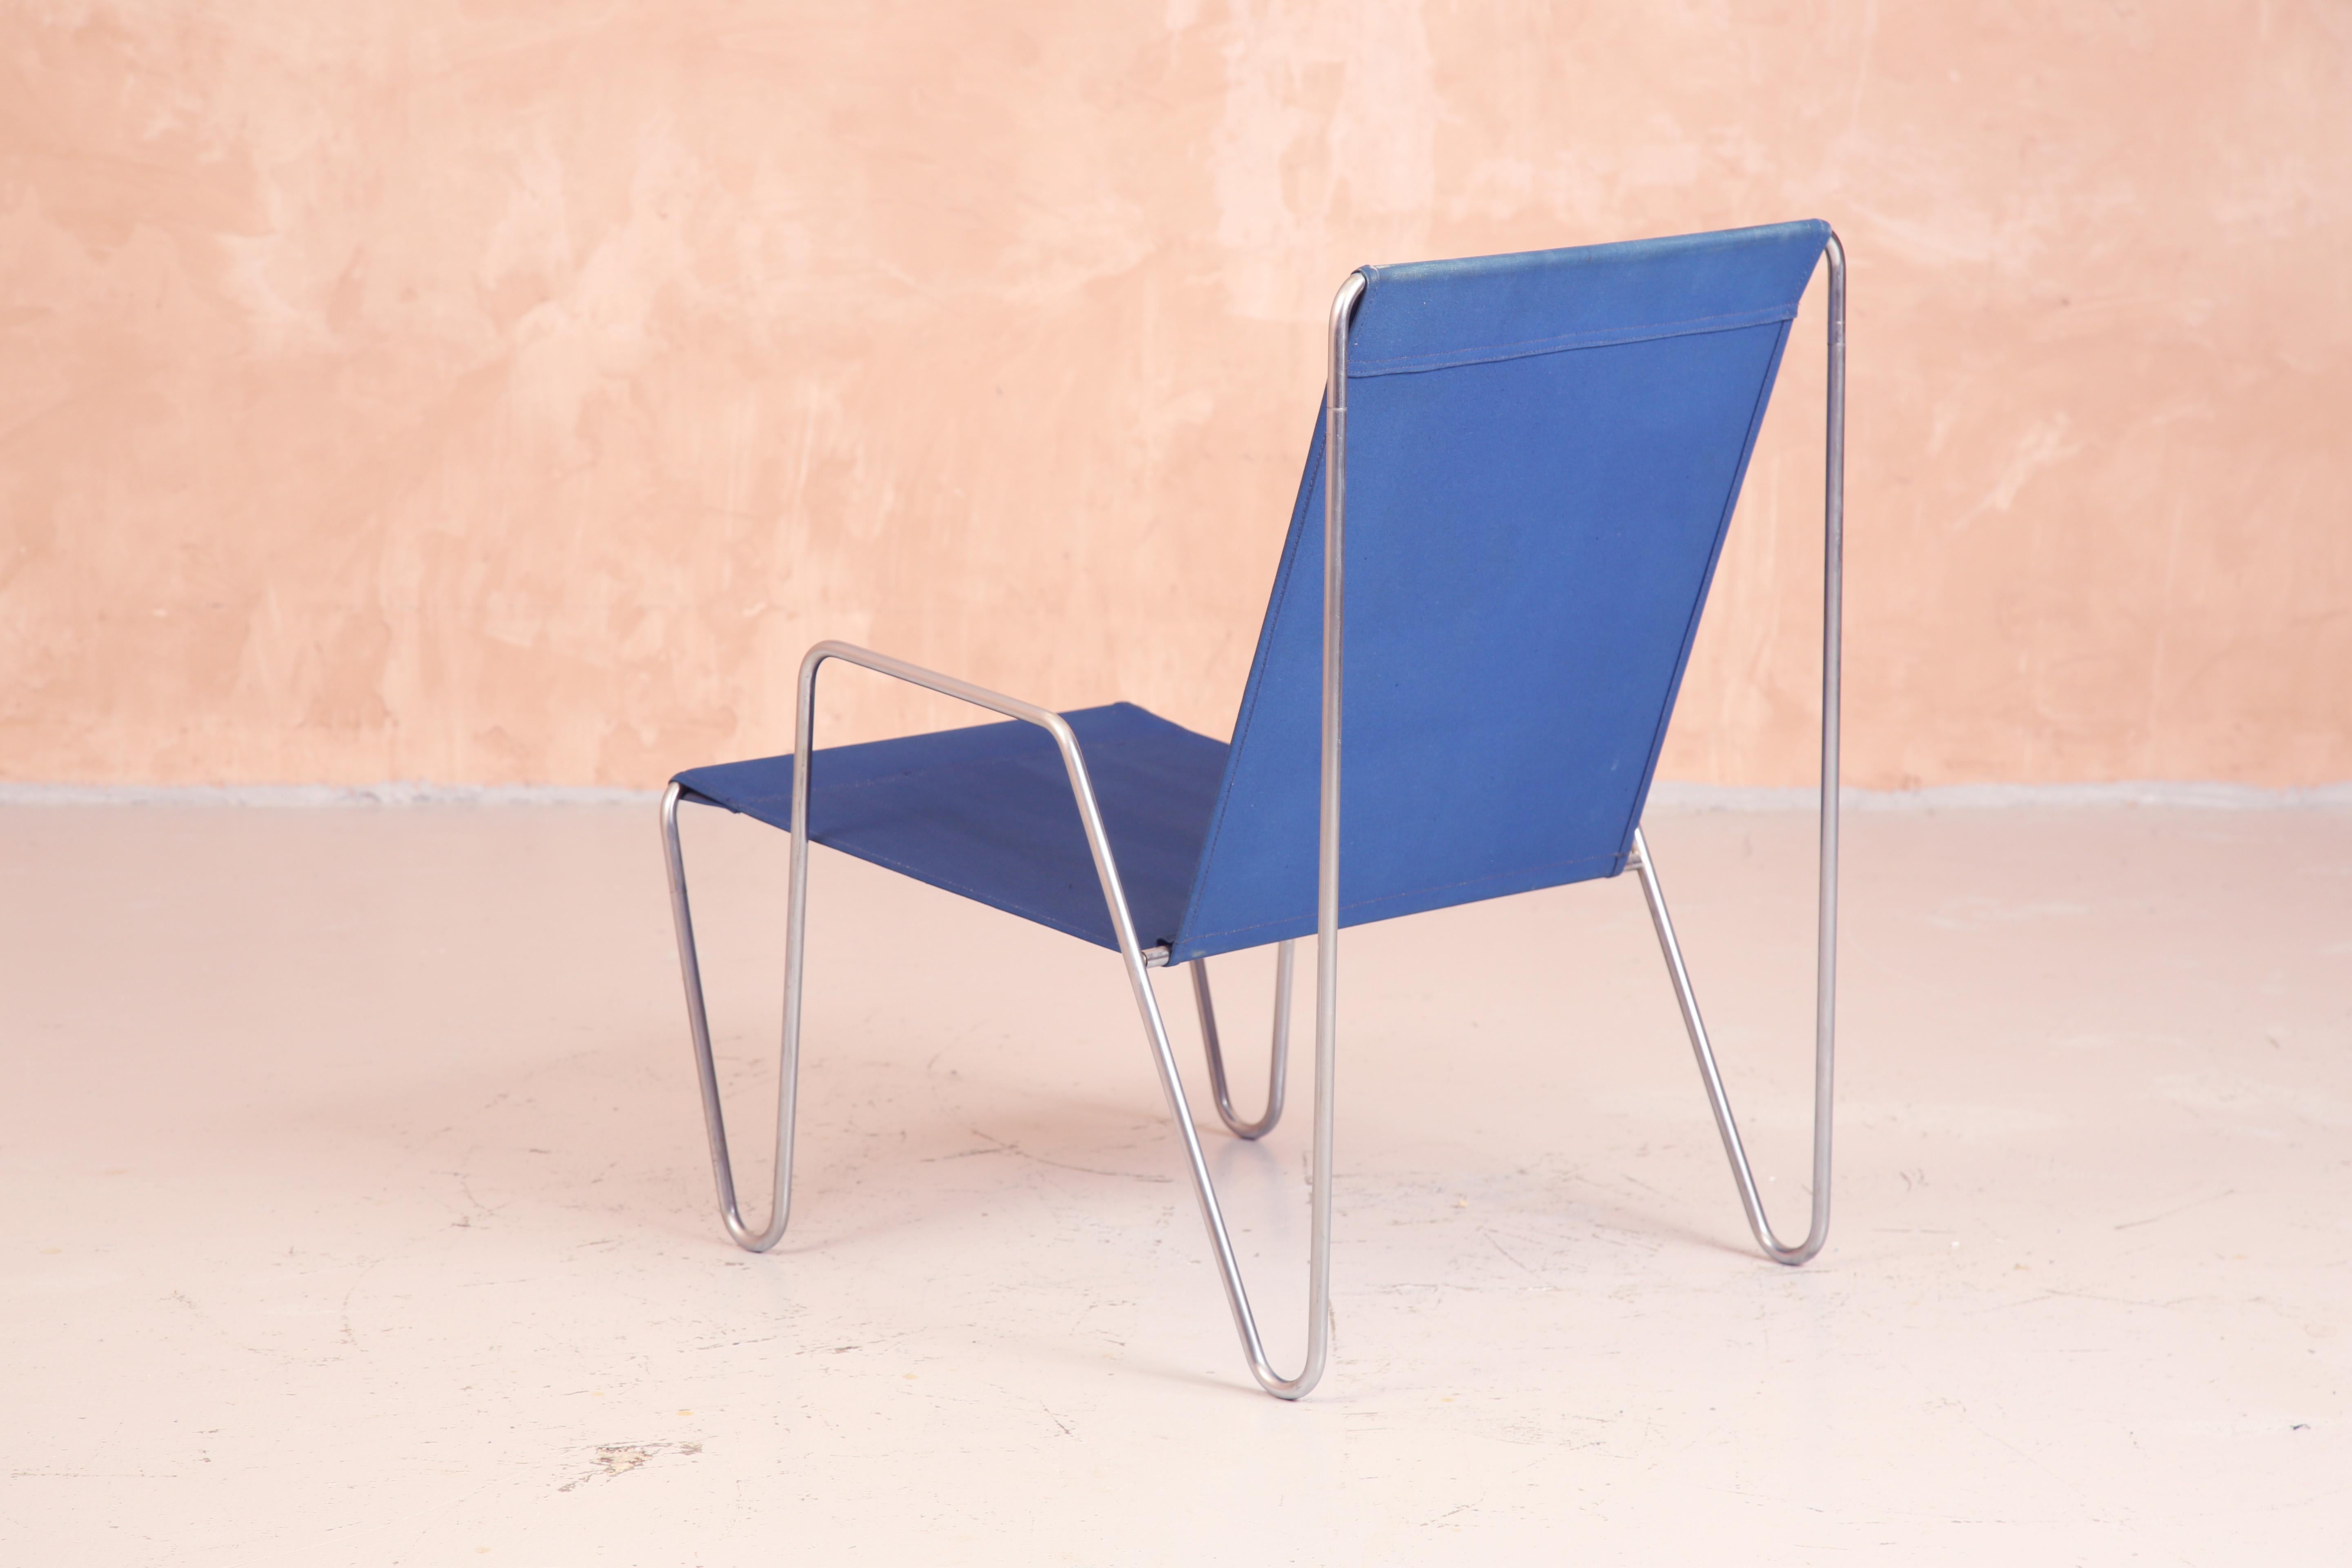 Verner Panton Bachelor Chair in Blue Sailcloth, Frtiz Hansen, 1955 In Good Condition For Sale In London, GB